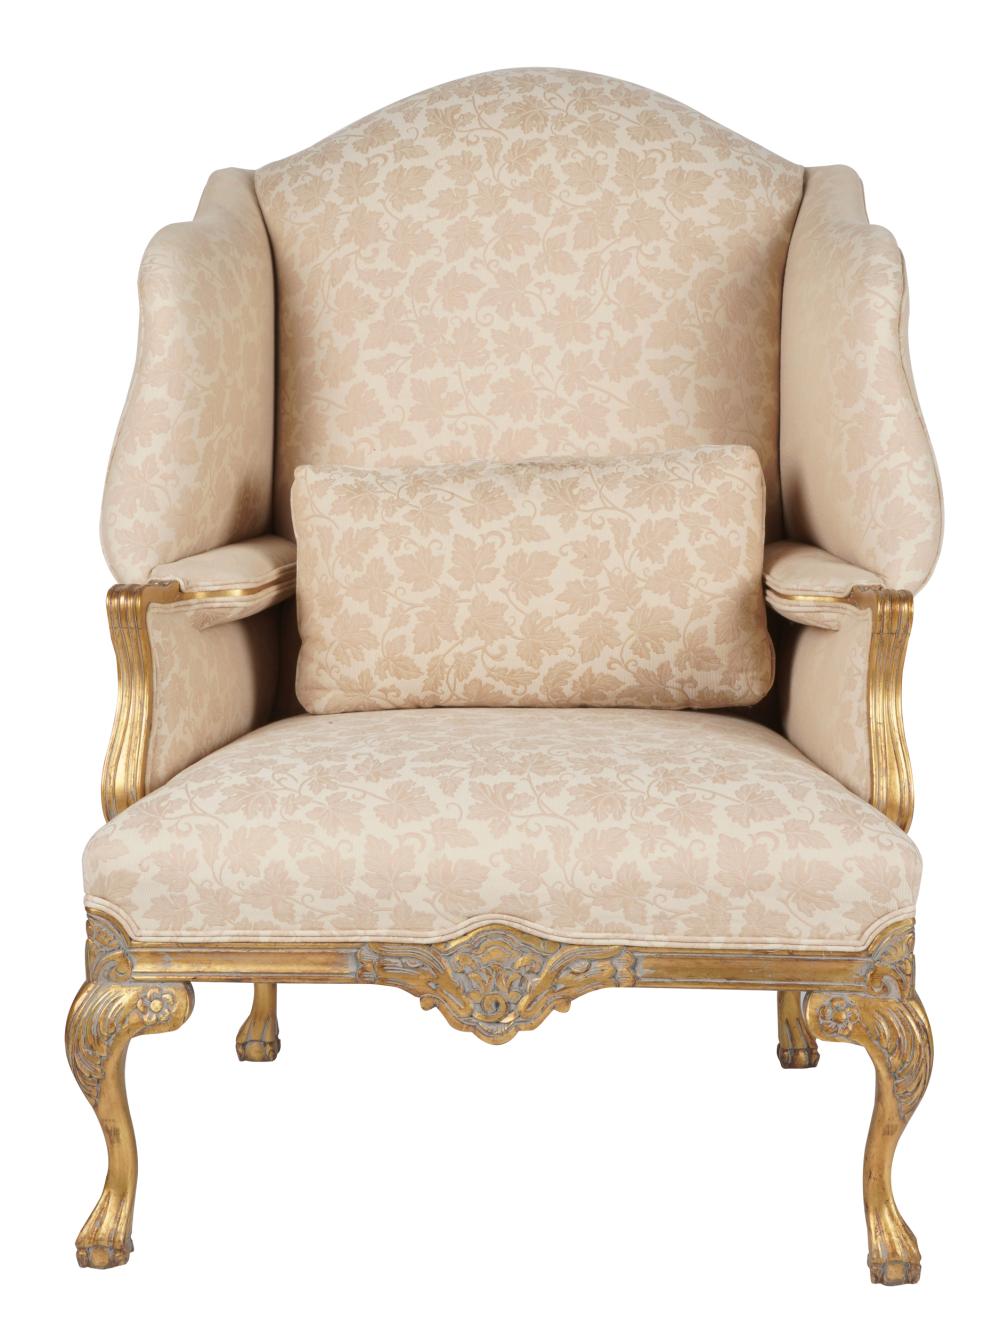 LOUIS XV STYLE GILTWOOD WING CHAIR20th 3311d9